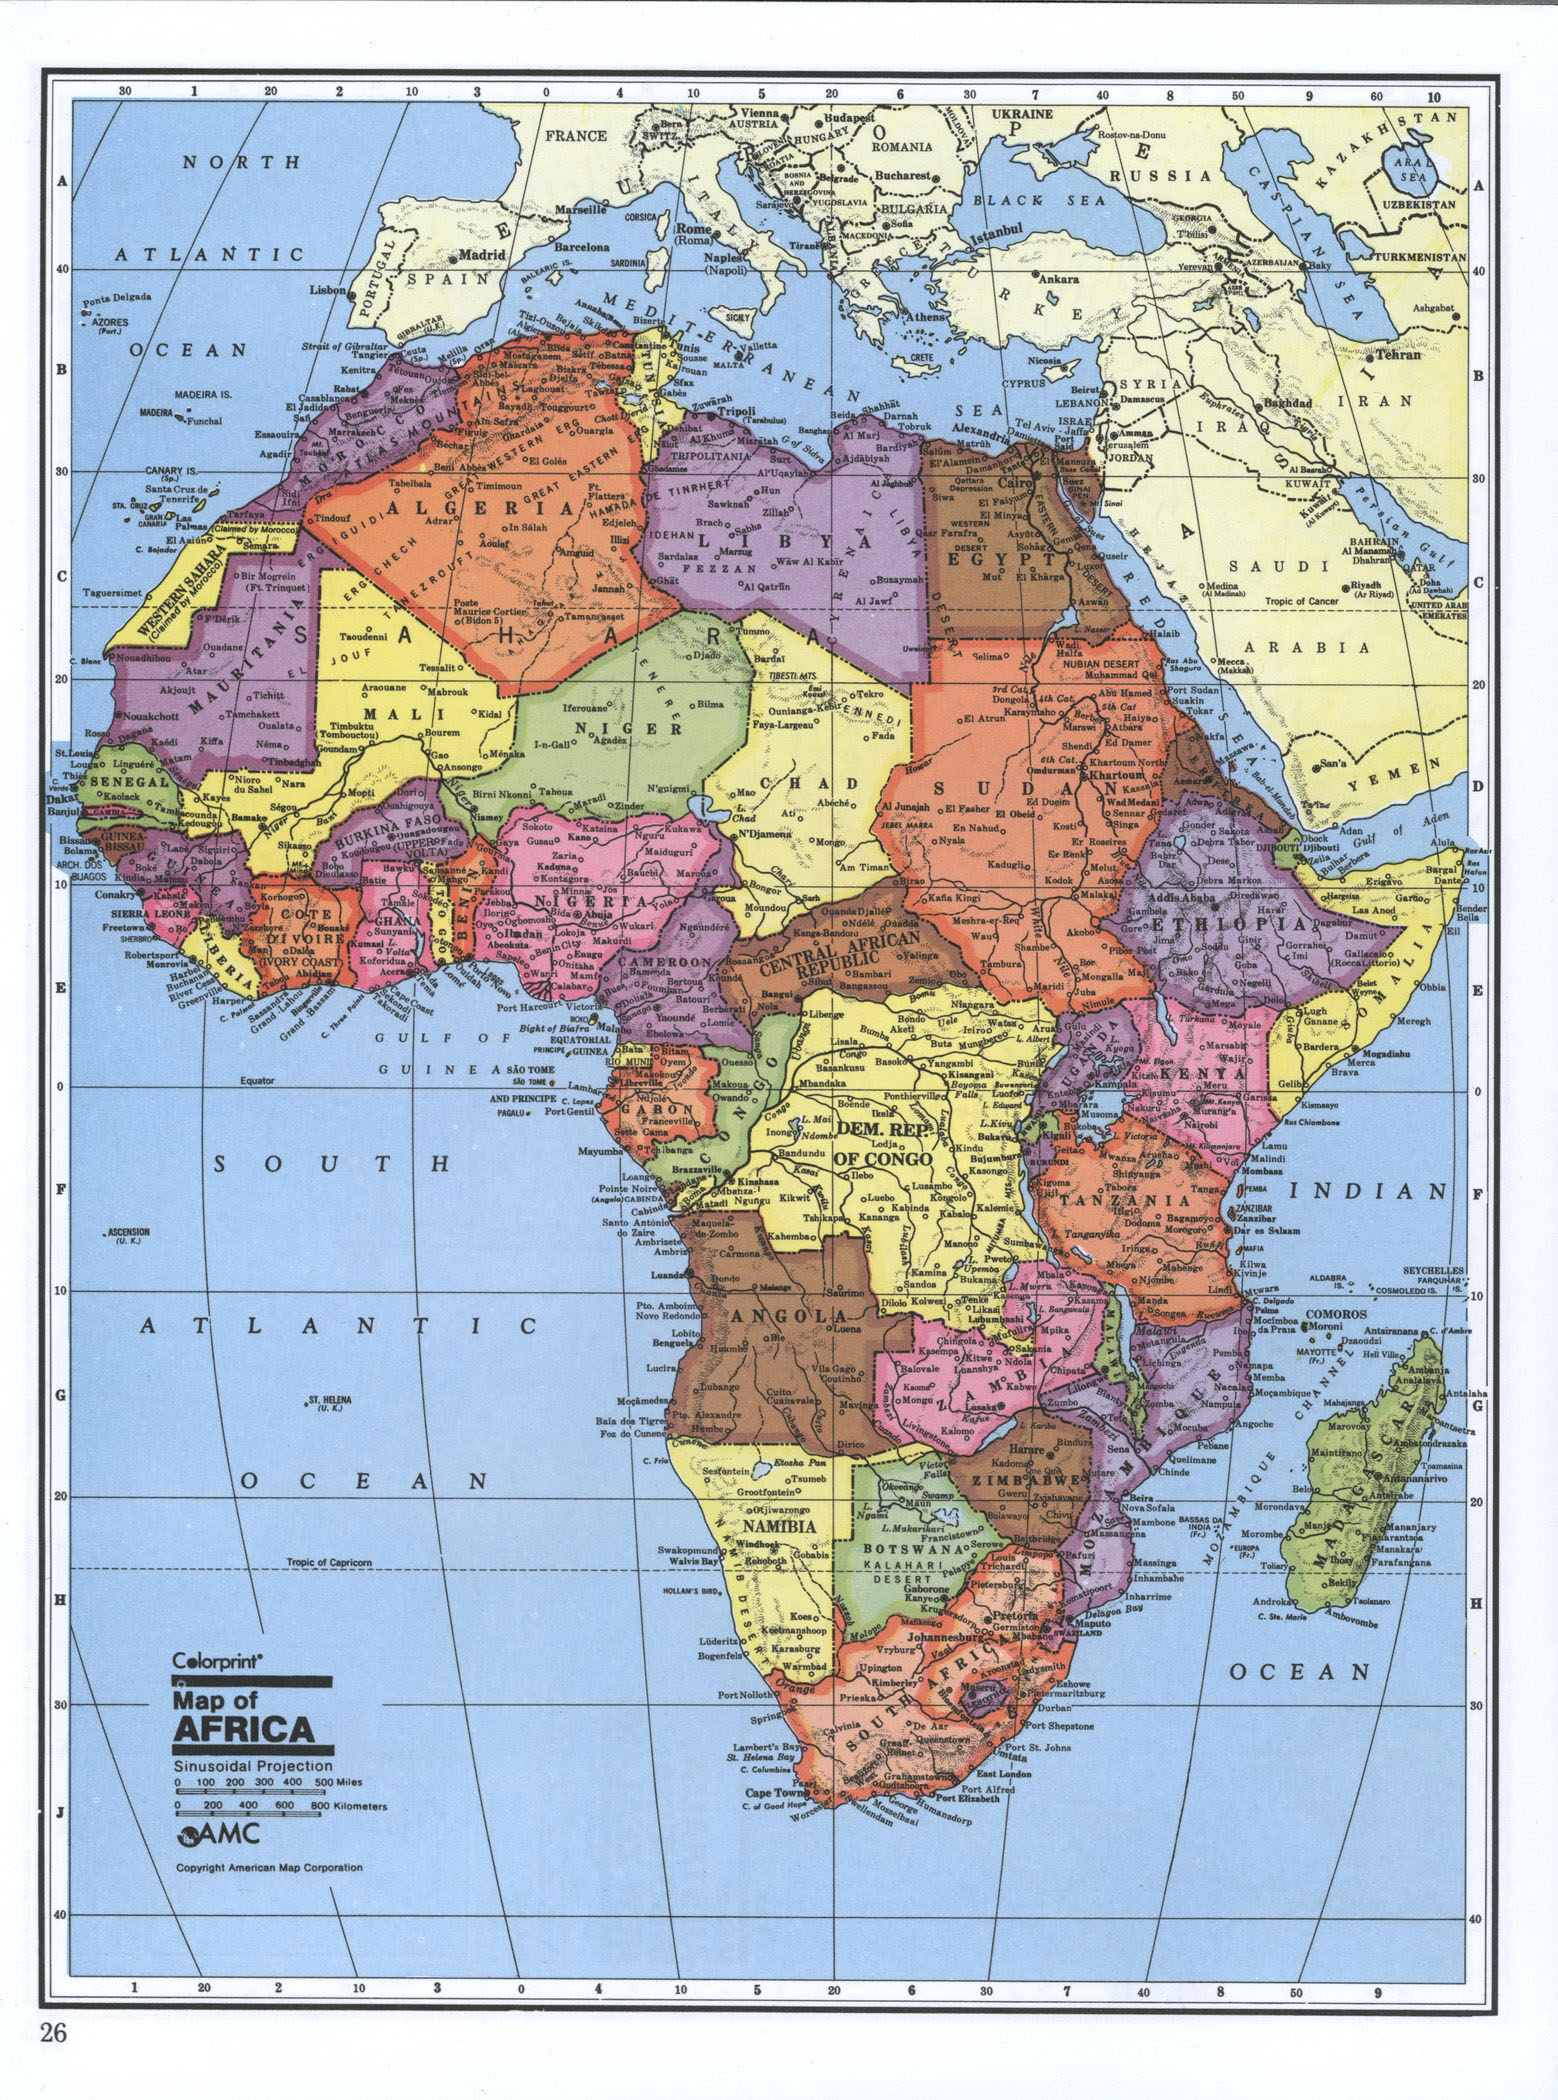 countries-map-of-africa-cool-free-new-photos-blank-map-of-africa-blank-map-of-africa-printable